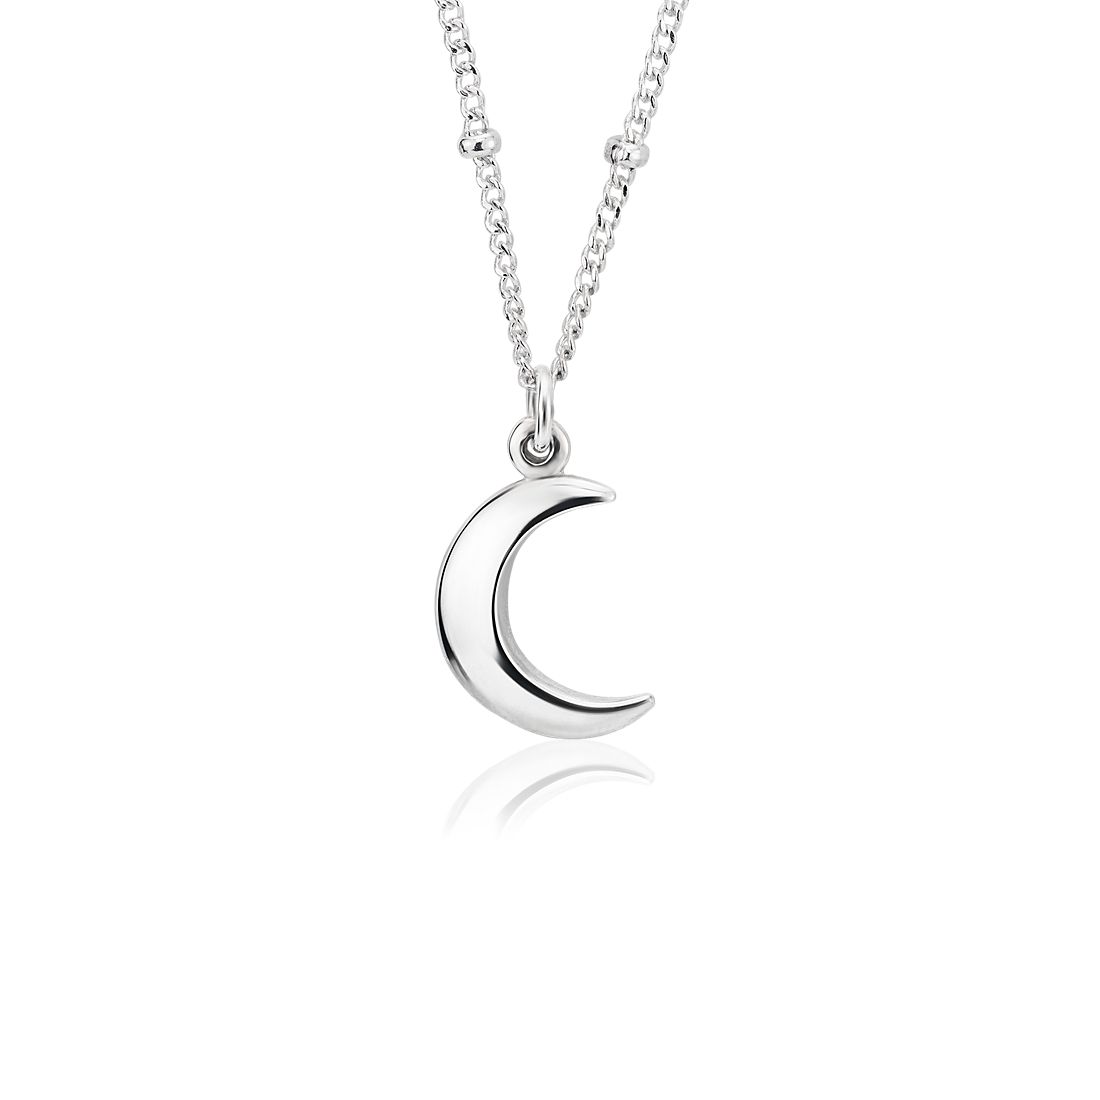 Moon Pendant with Saturn Chain in Sterling Silver